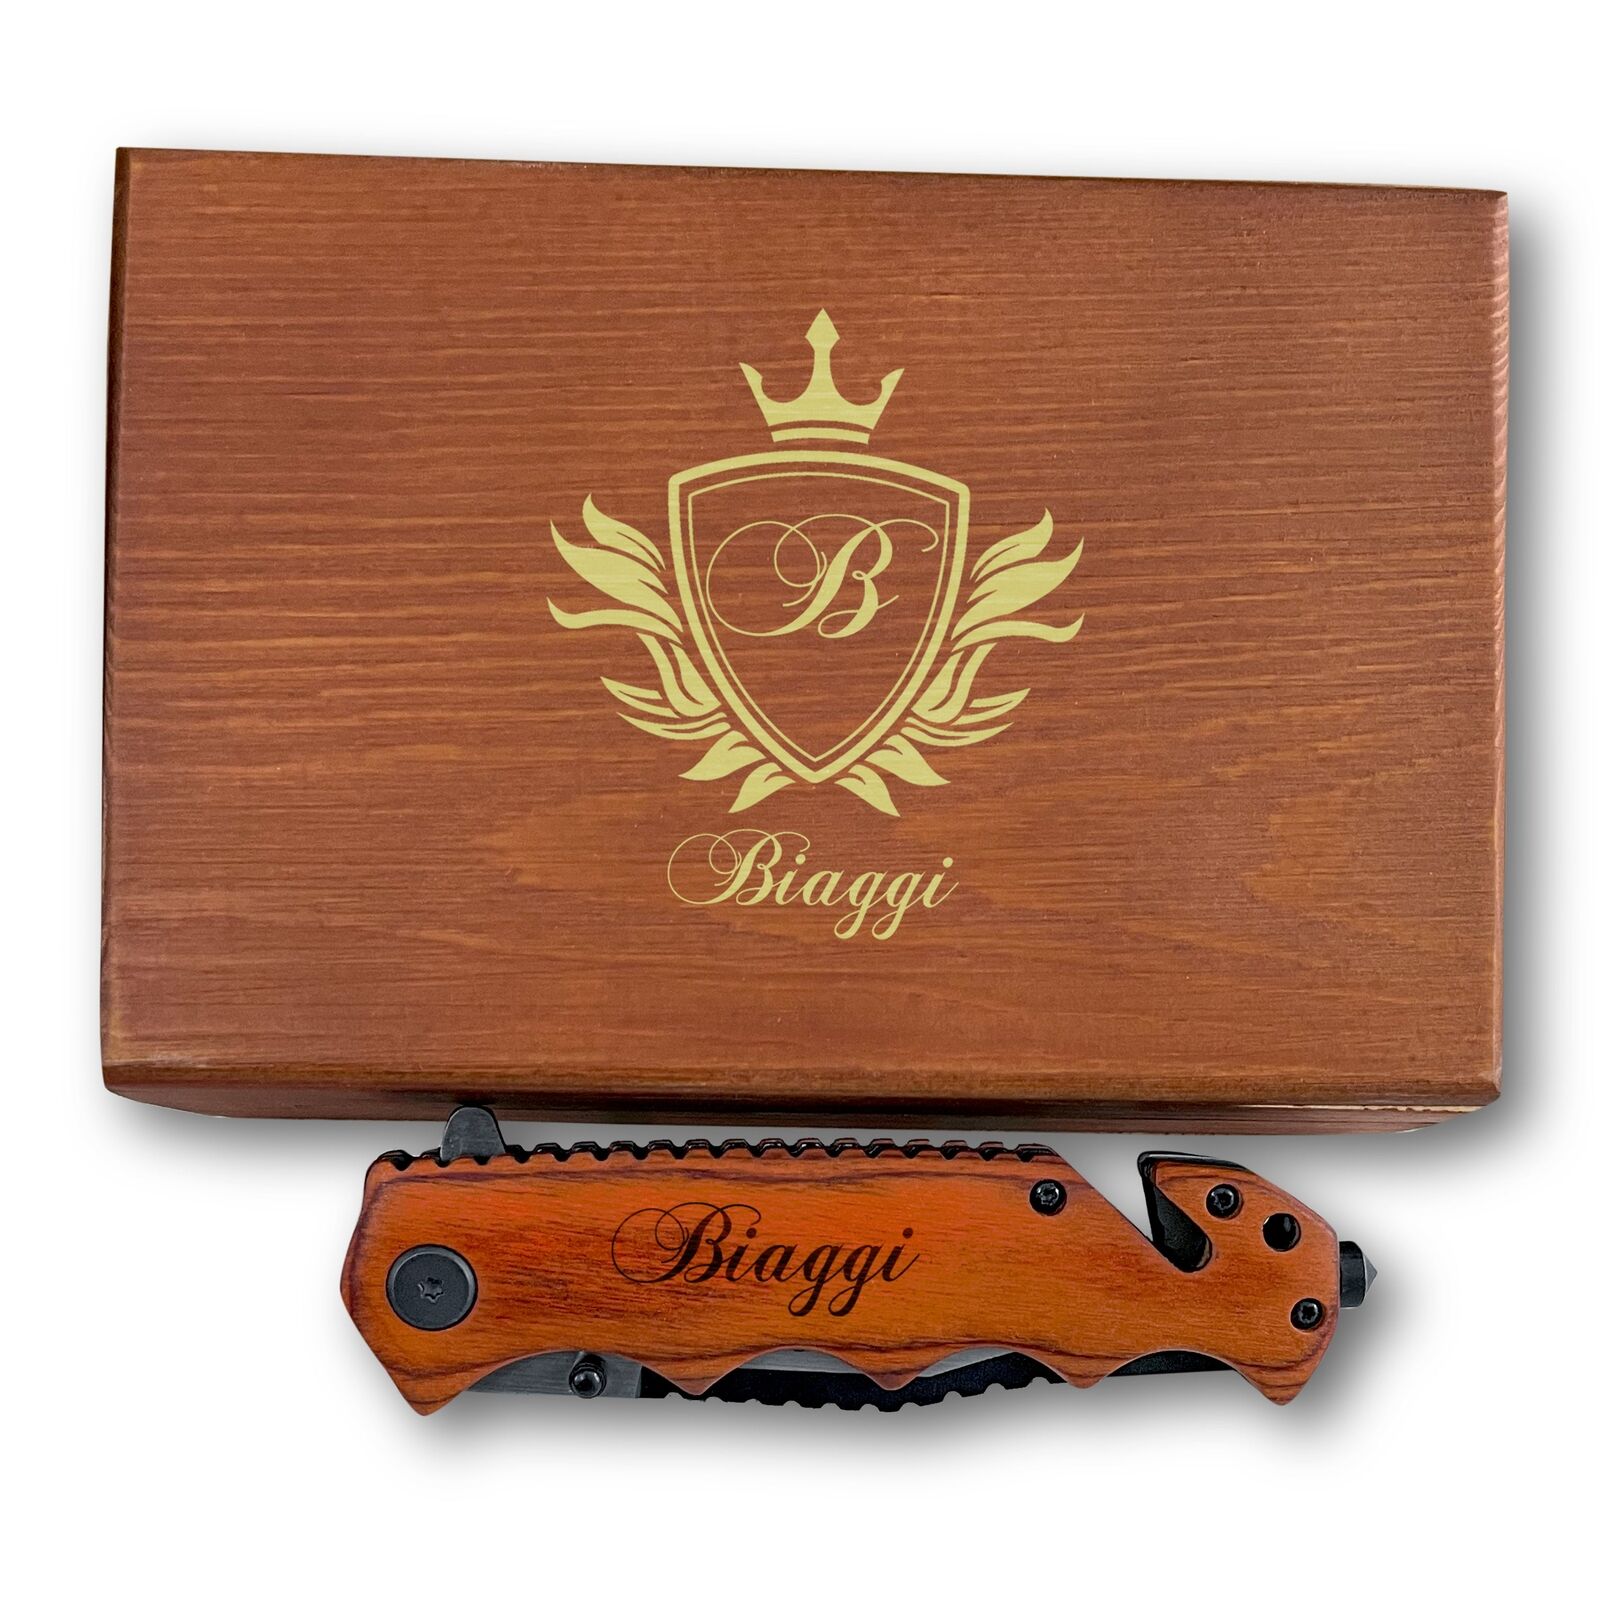 Personalized Knife, Best Multi-Purpose Knife, Etched Knife For Hiking with Engra